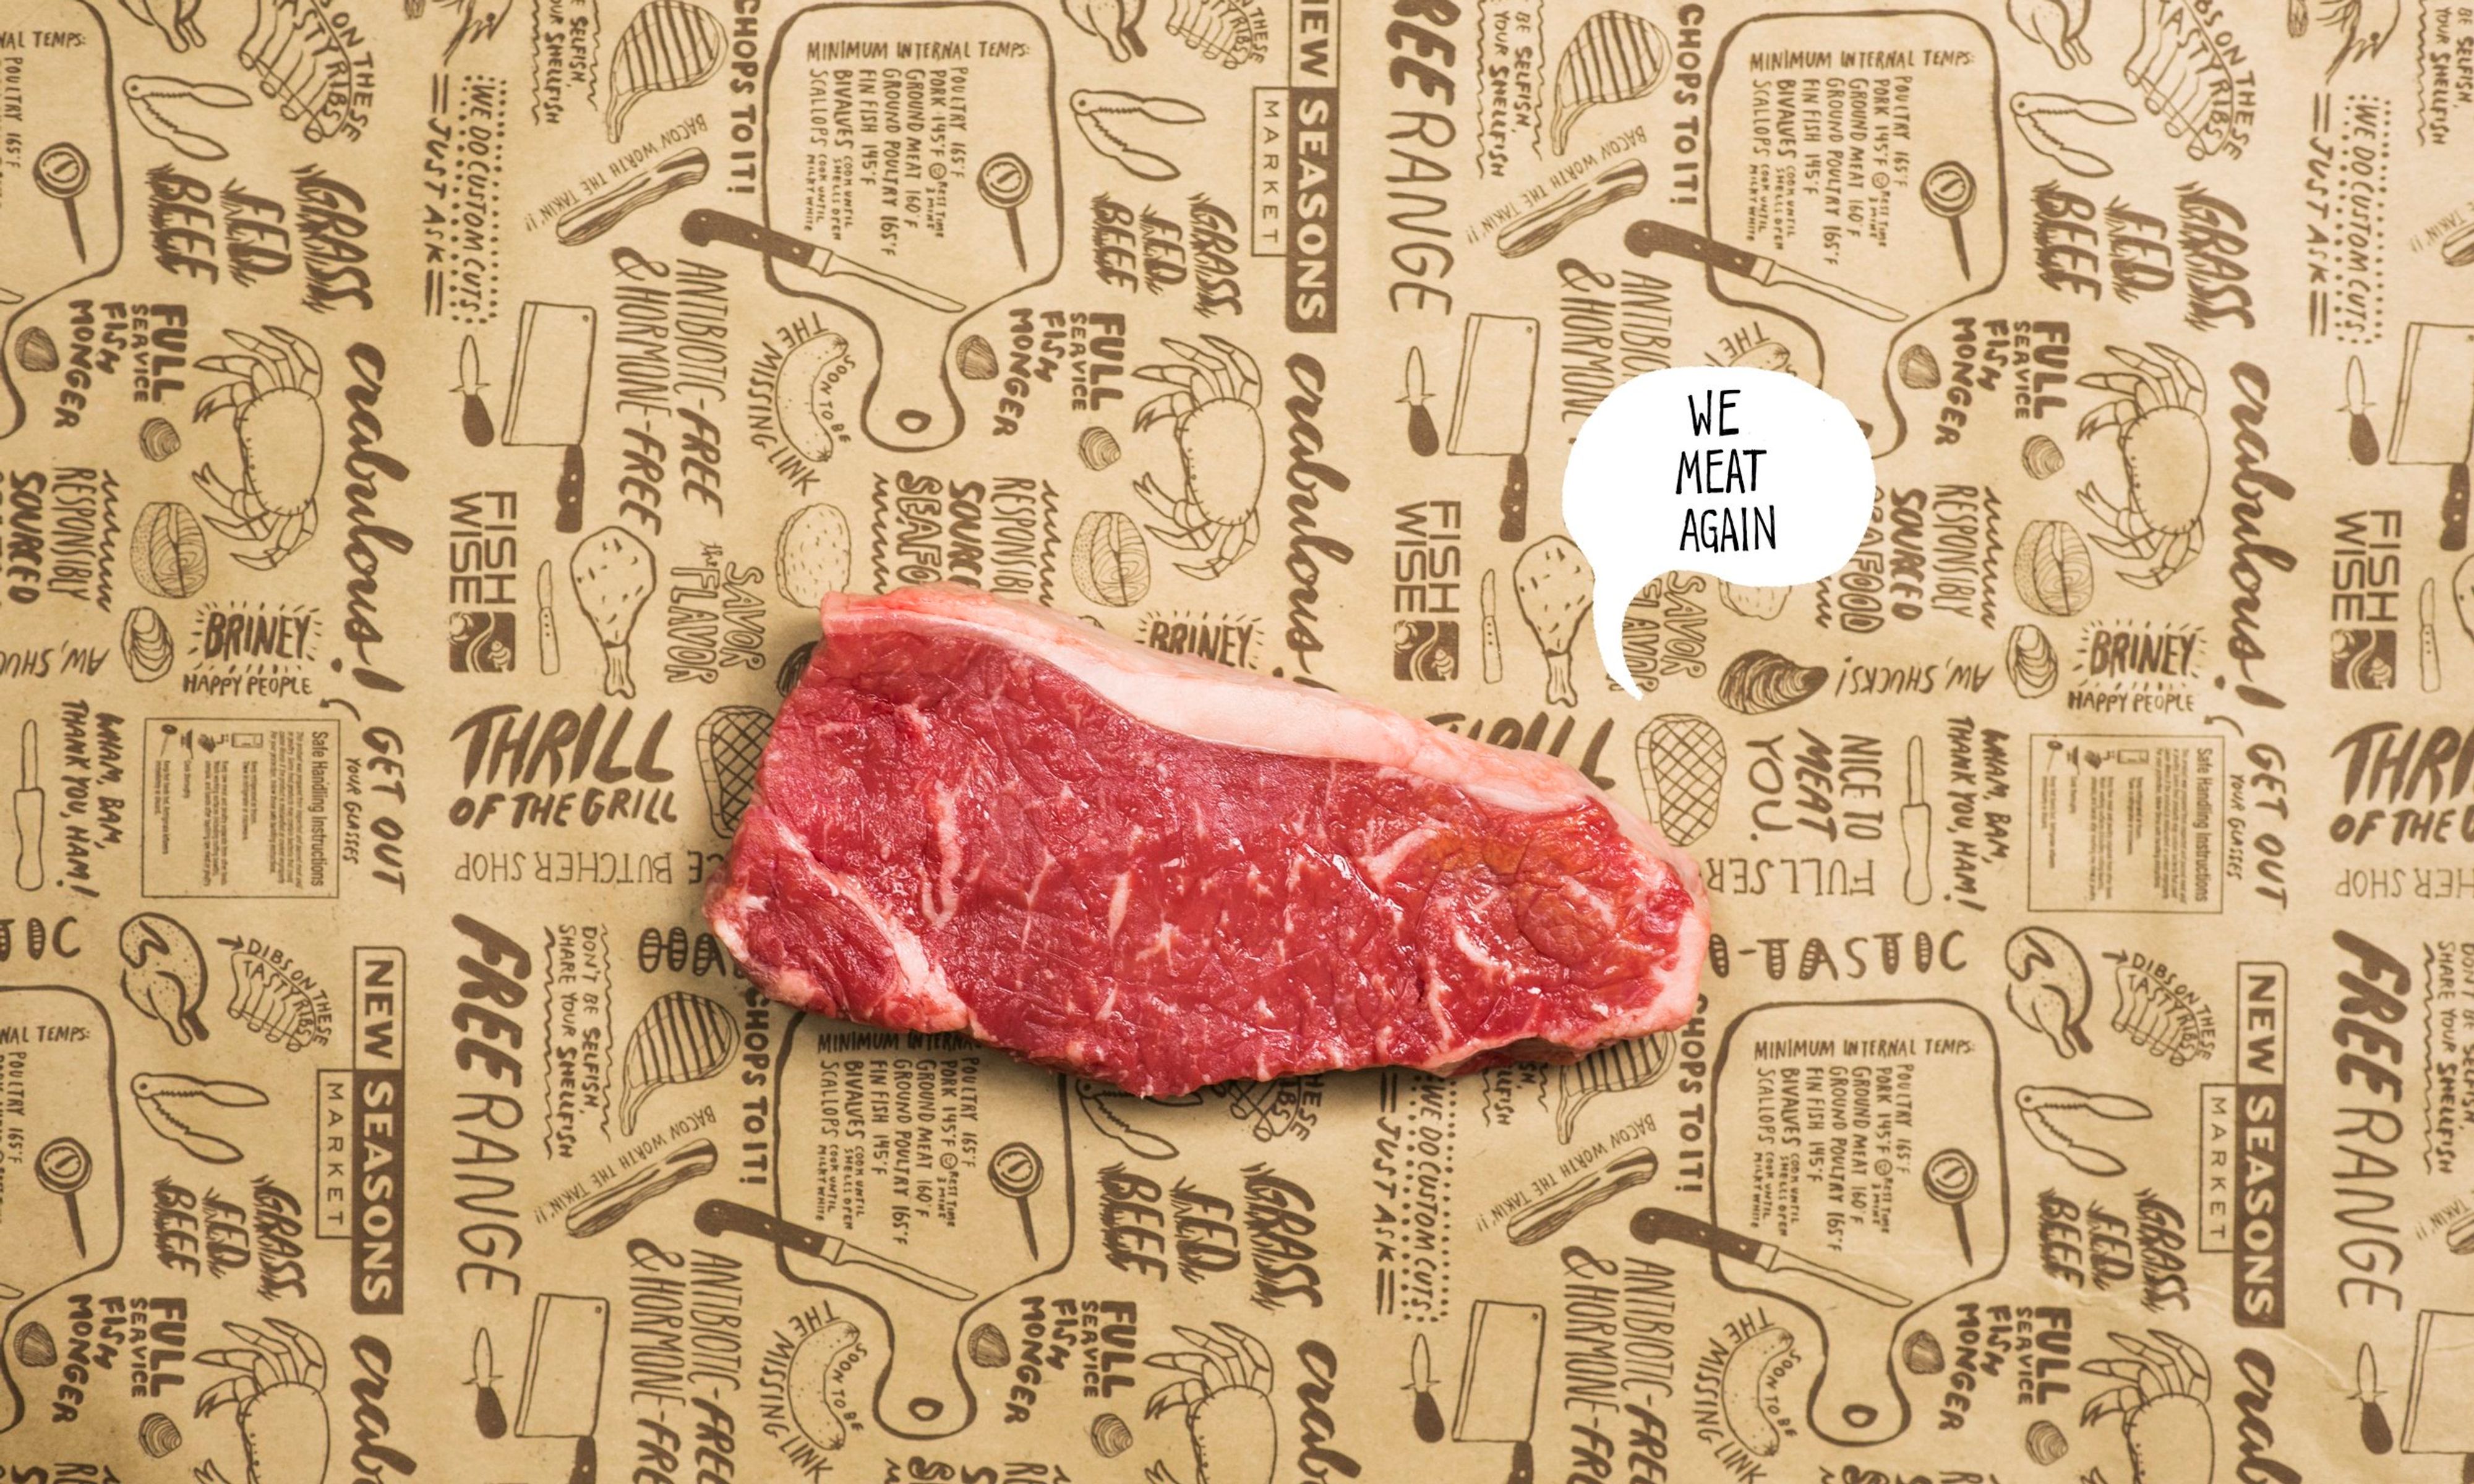 A cut of steak sitting on brown paper with several phrases and illustrations printed on it, with the text “We meat again” placed next to the steak in a speech bubble